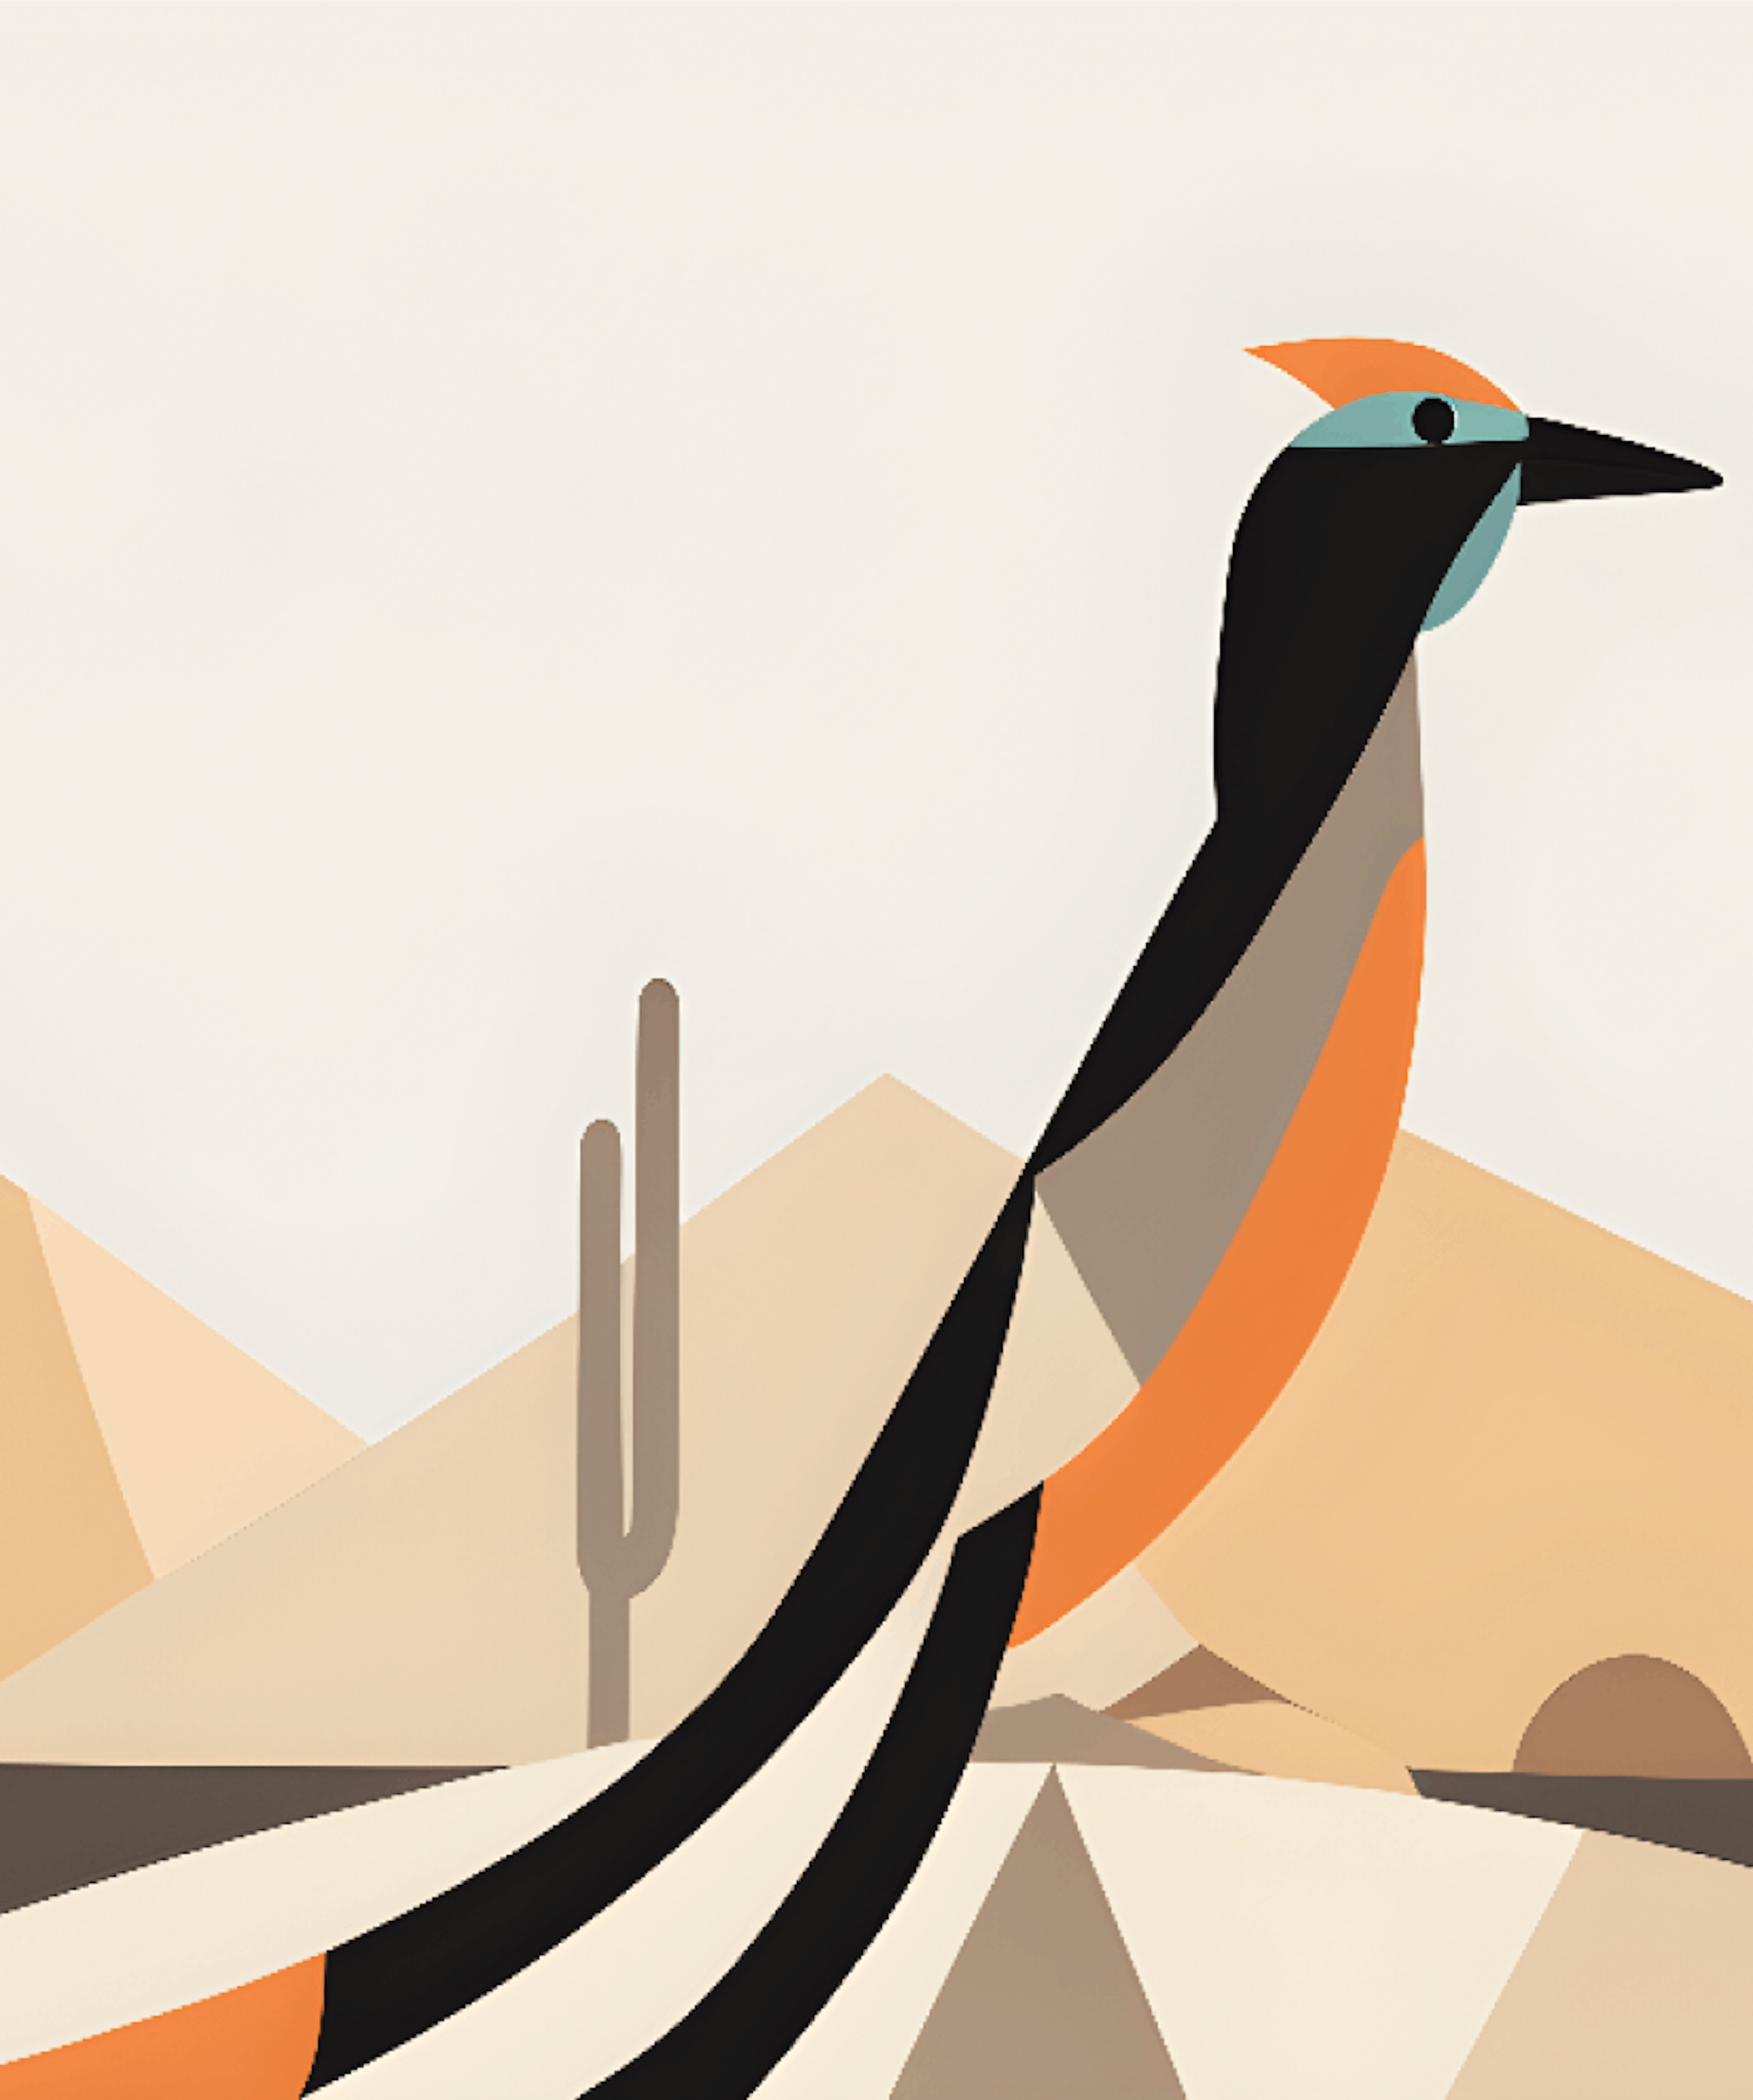 a roadrunner tail up going by a saguaro cactus in a sunlit desert scene